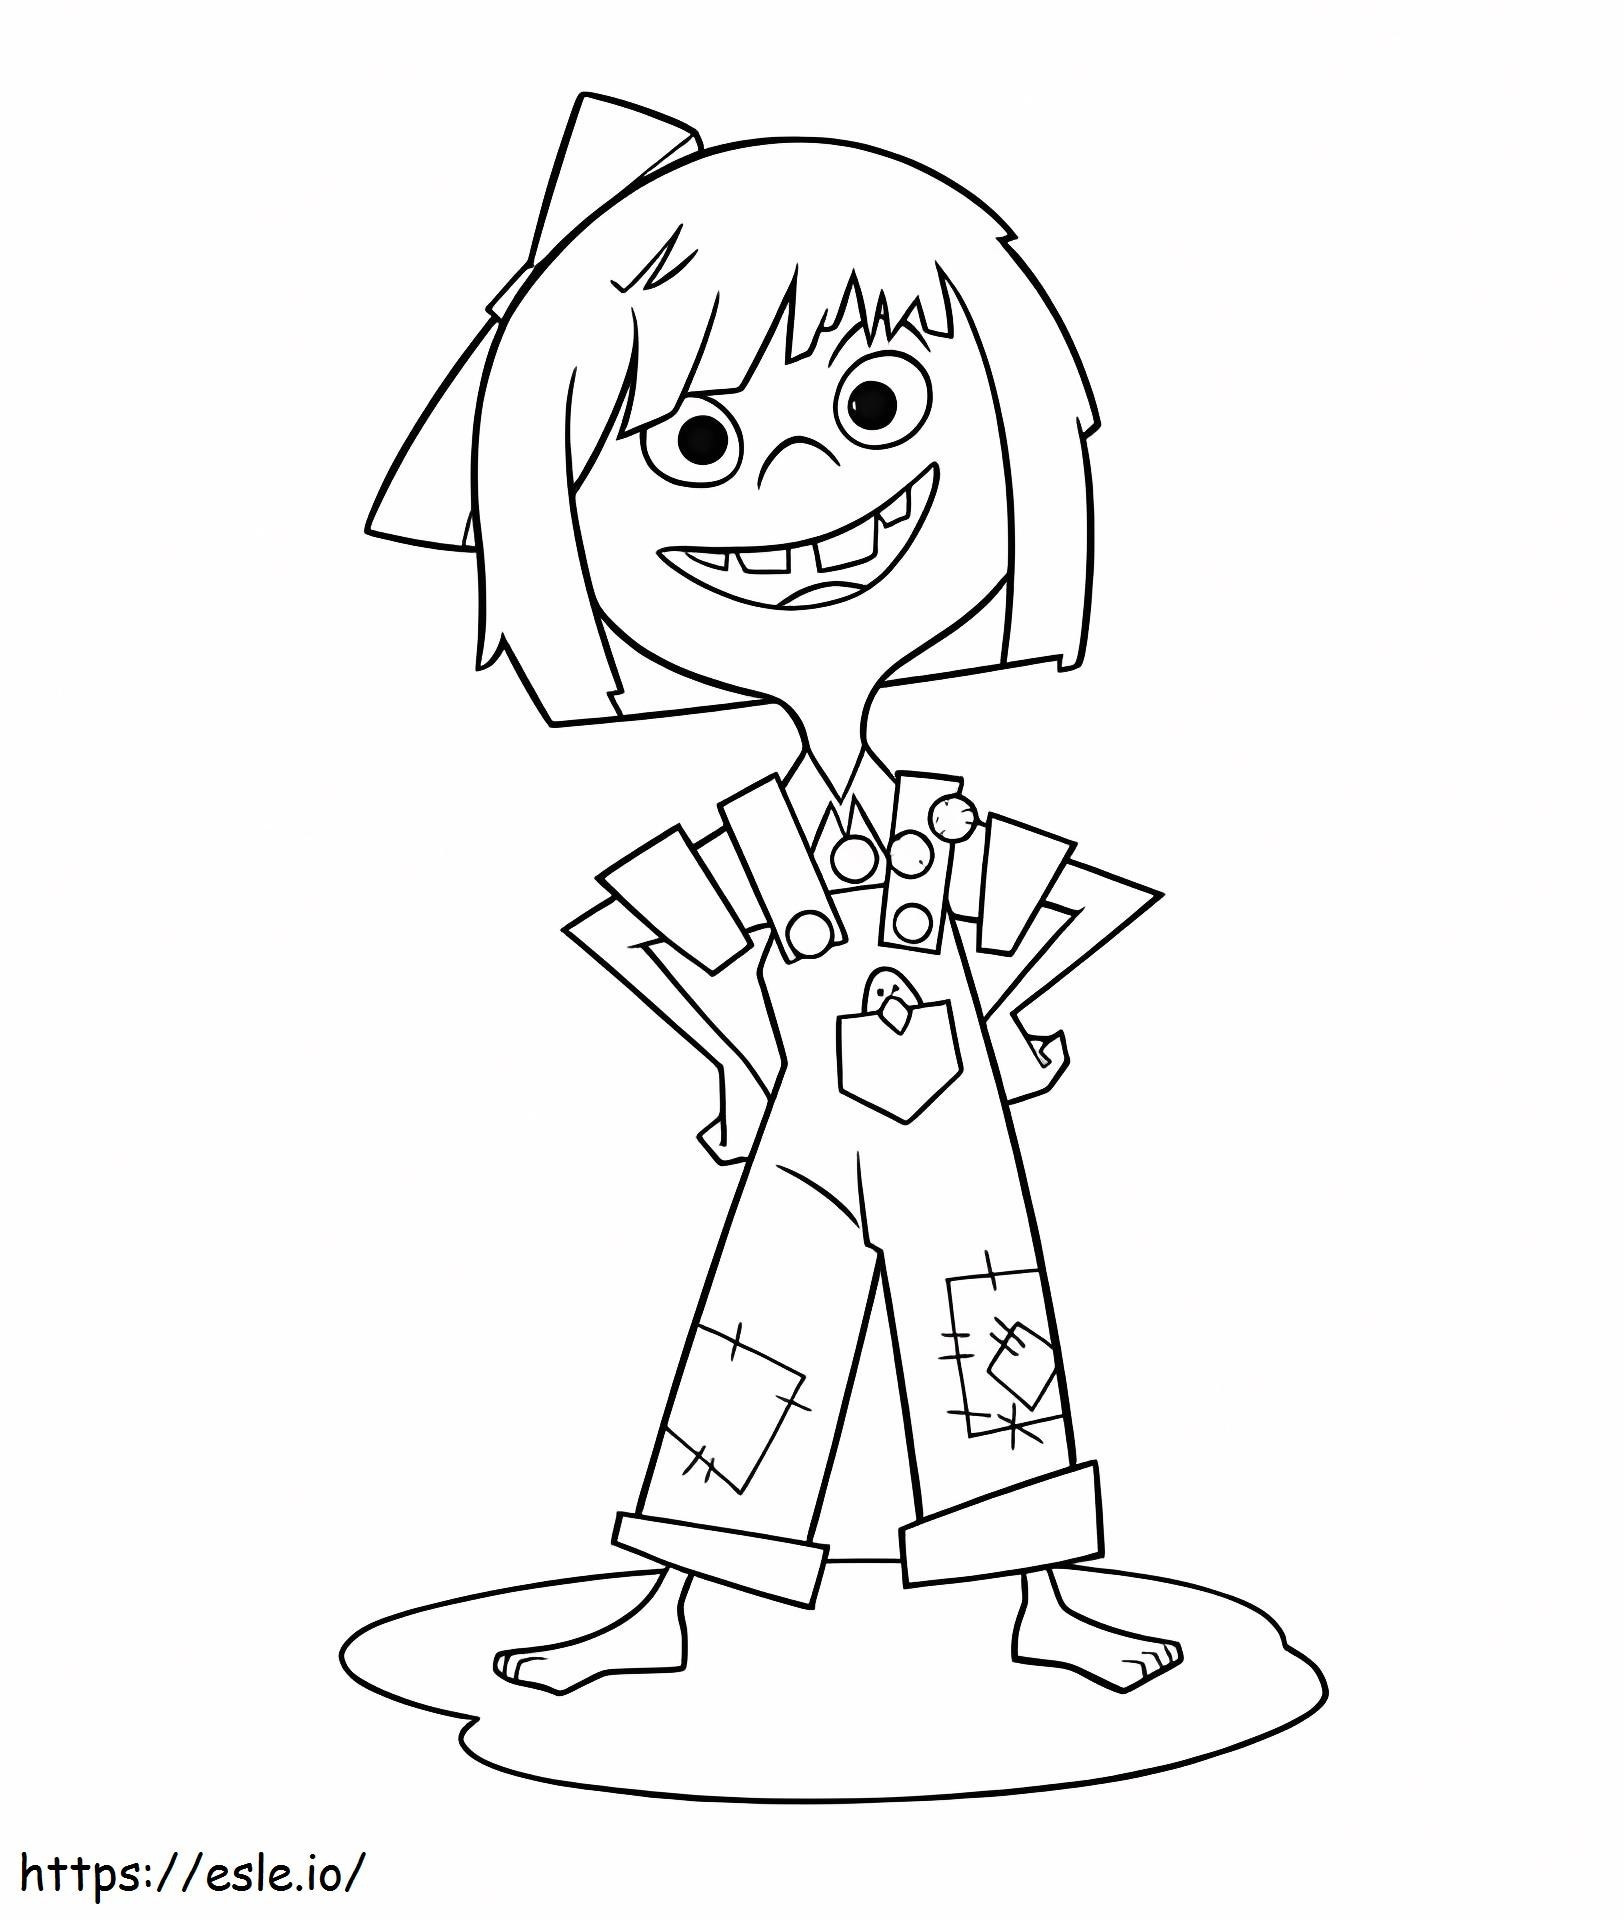 1559618777 Ellie Smiling A4 coloring page